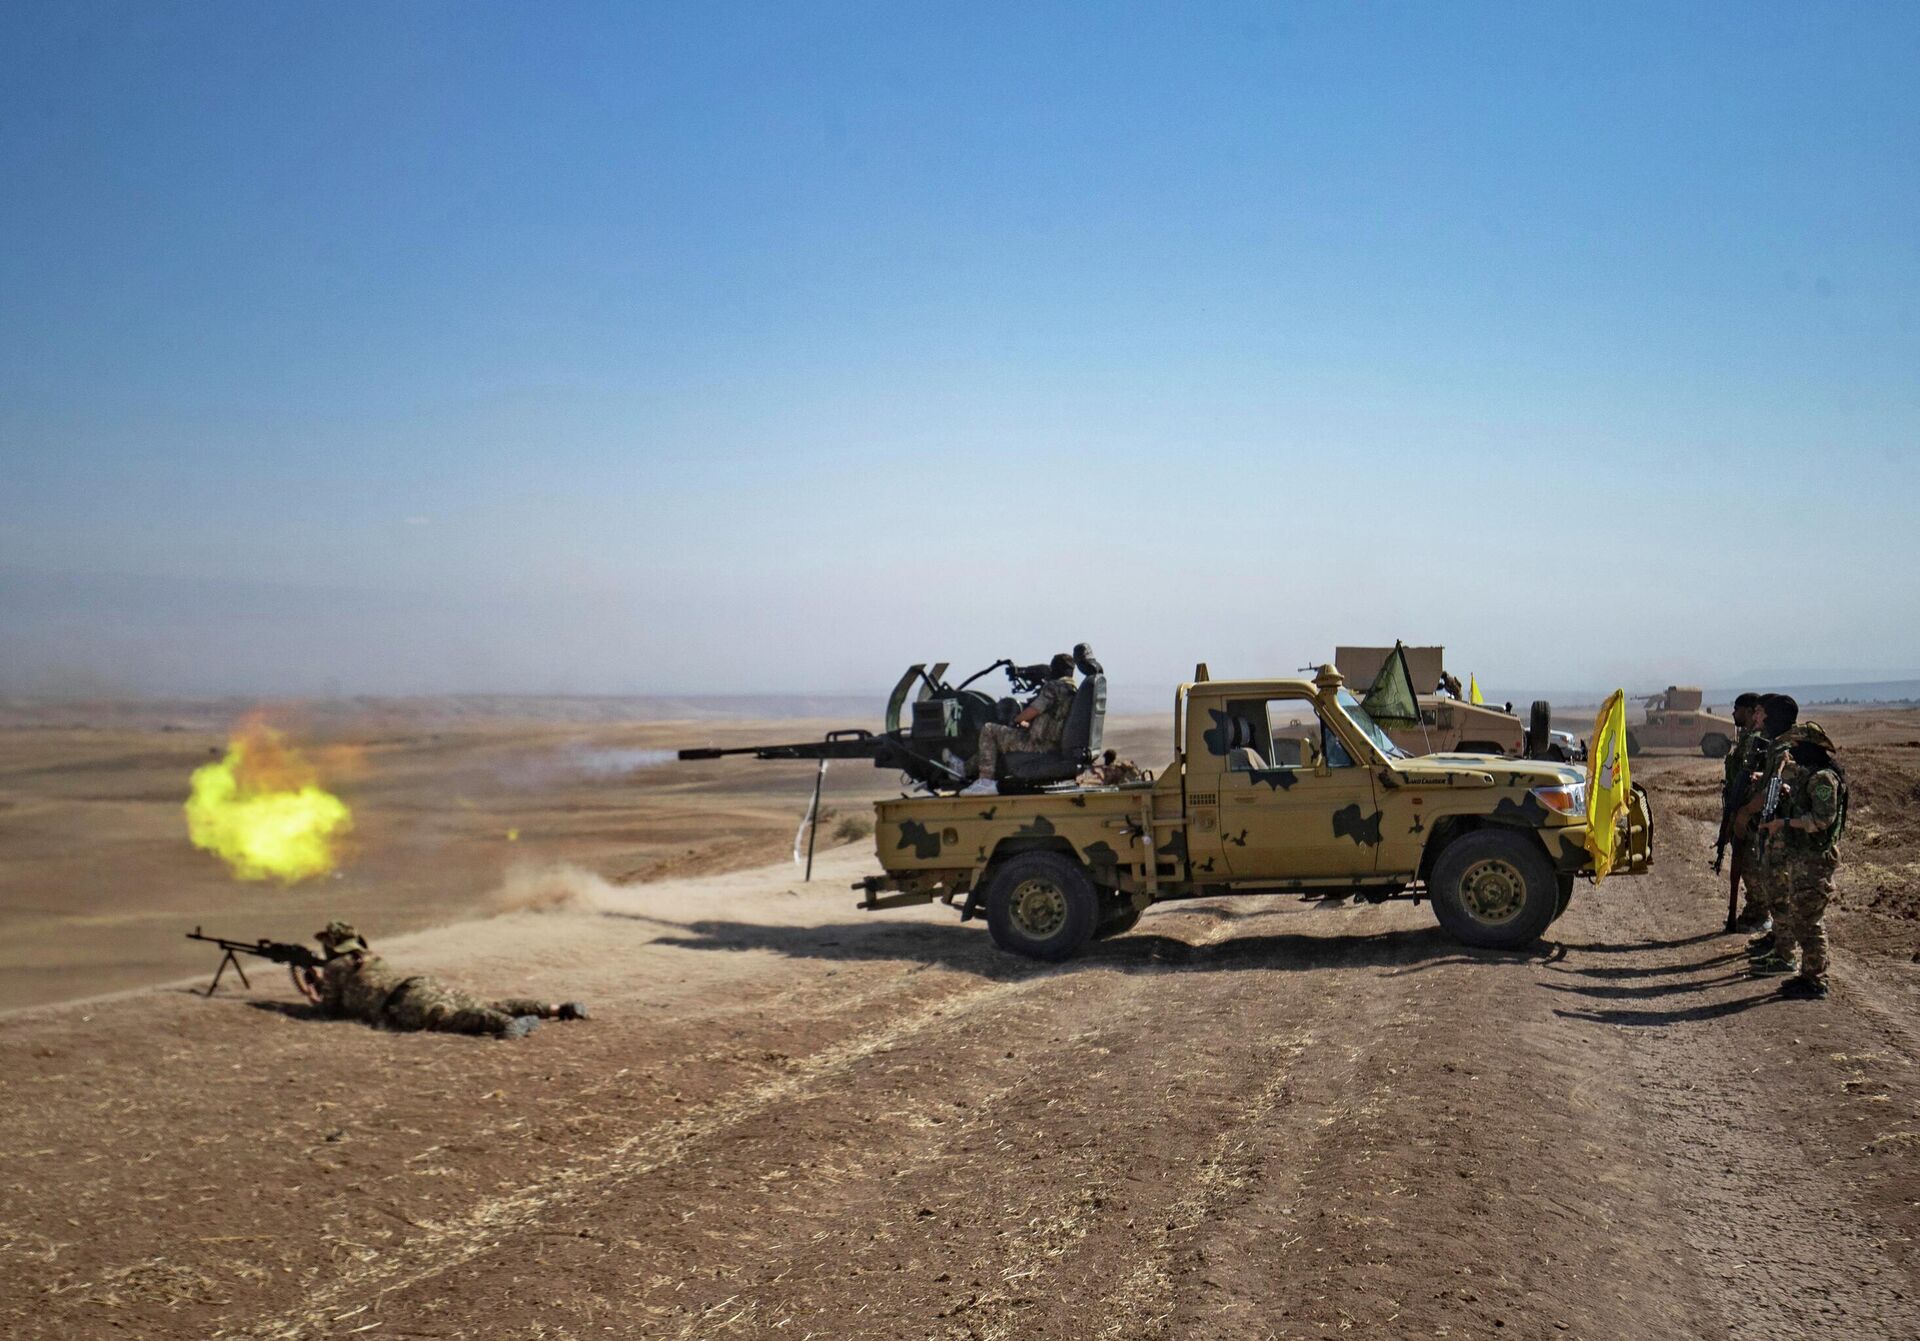 A fighter of the Syrian Democratic Forces (SDF) fires the turret of a technical vehicle during a joint exercise with forces of the US-led Combined Joint Task Force-Operation Inherent Resolve coalition against the Islamic State (IS) group in the countryside of the town of al-Malikiya (Derik in Kurdish) in Syria's northeastern Hasakah province on September 7, 2022 - Sputnik International, 1920, 09.09.2022